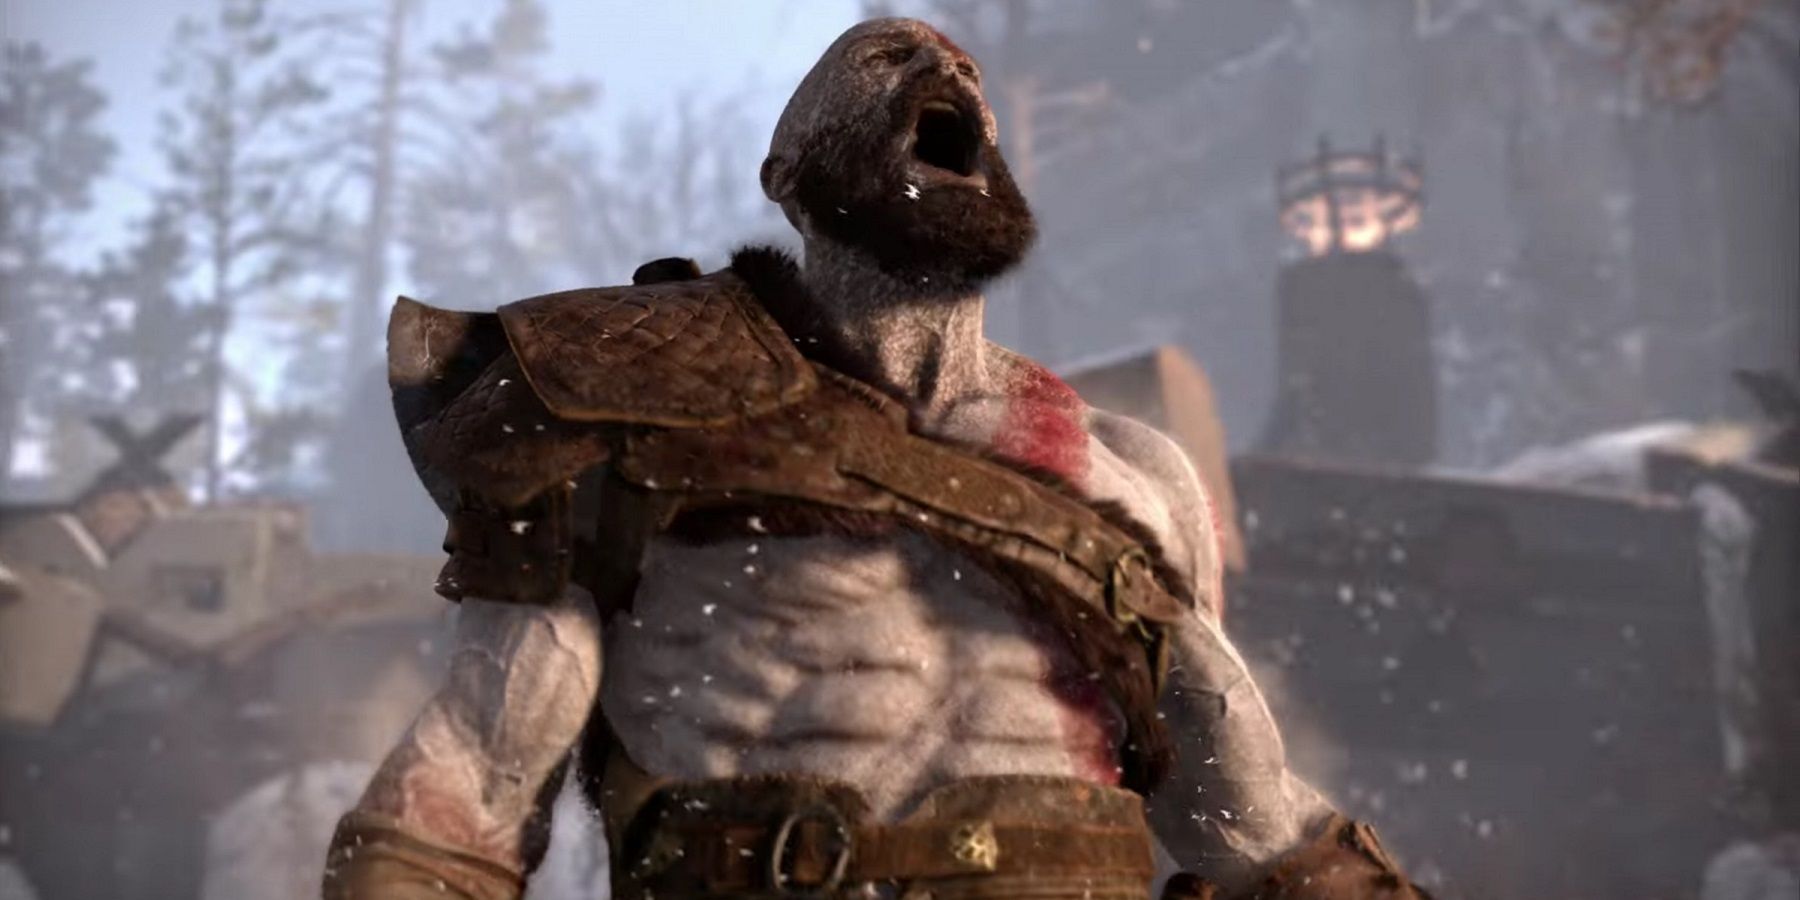 Screenshot from God of War showing Kratos yelling towards the sky.